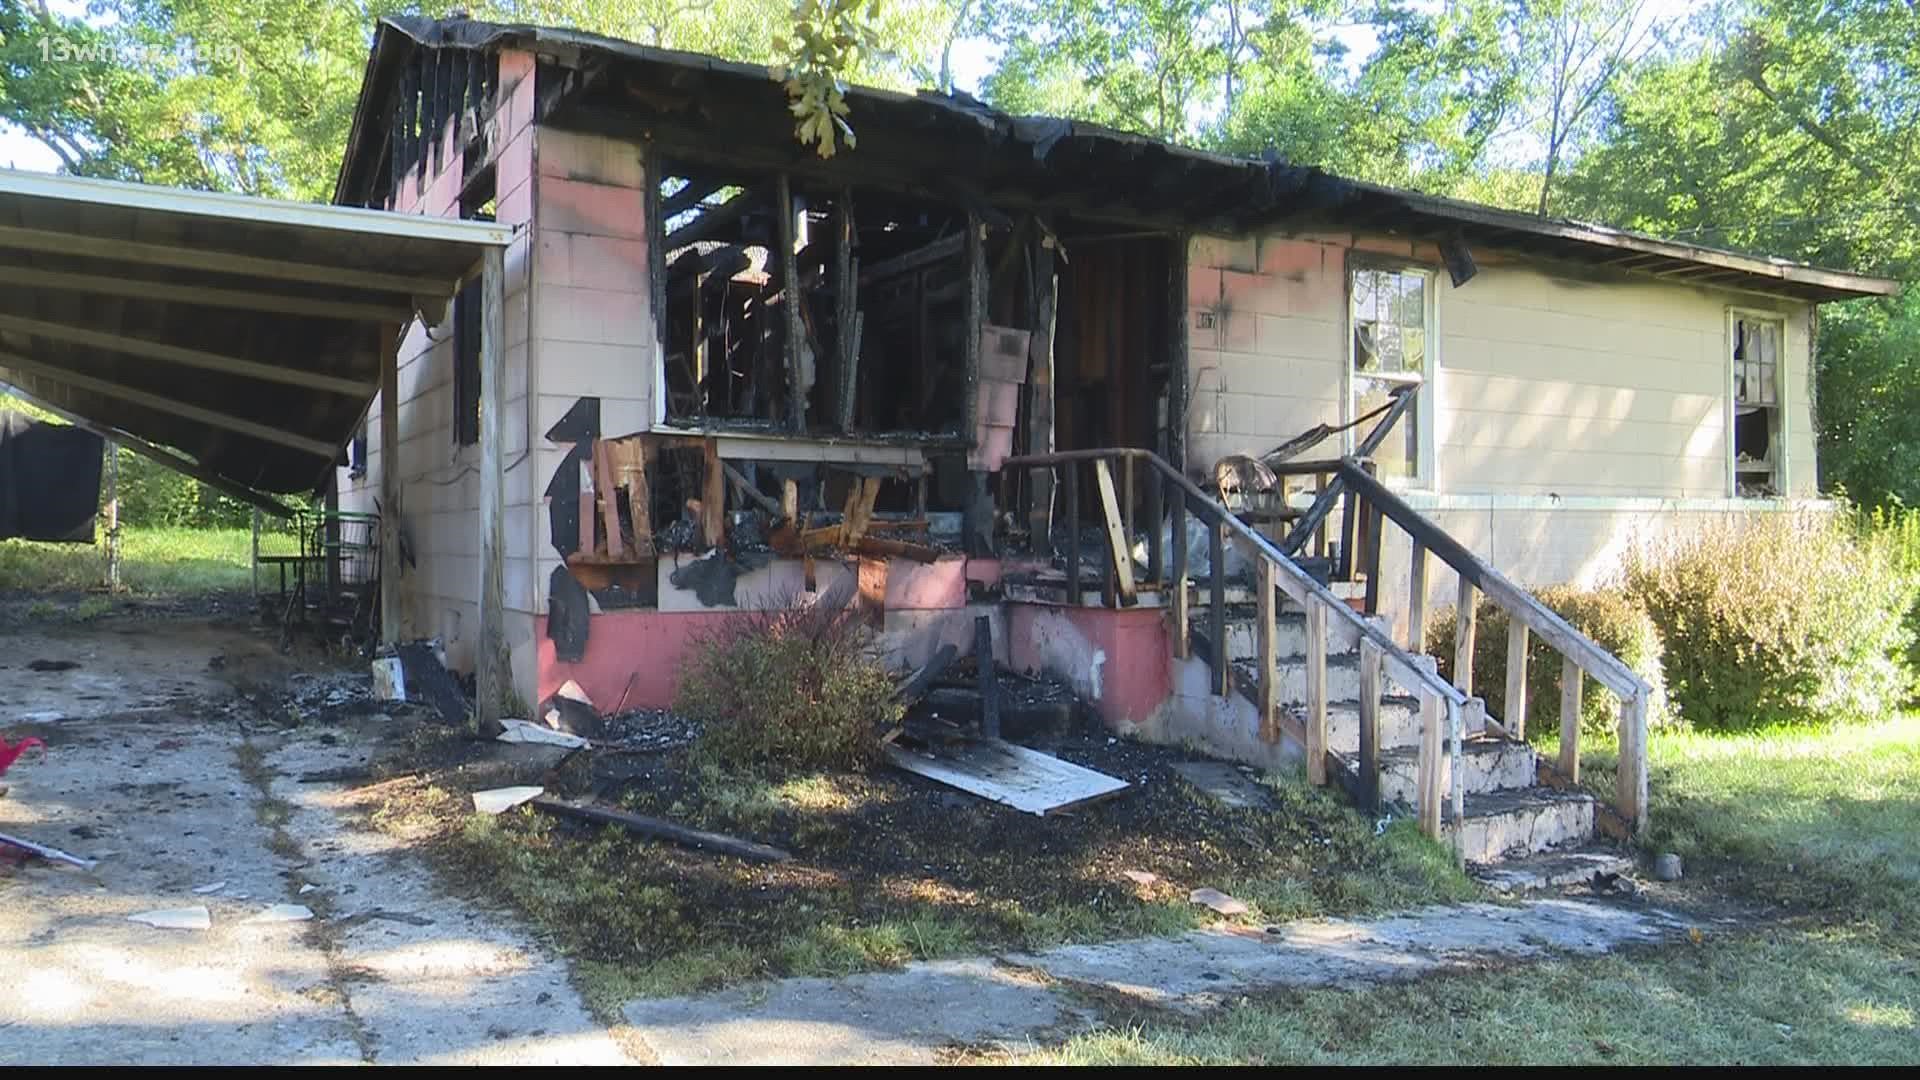 Macon-Bibb Fire Department says the fire was accidental and started in the attic by an electrical problem.